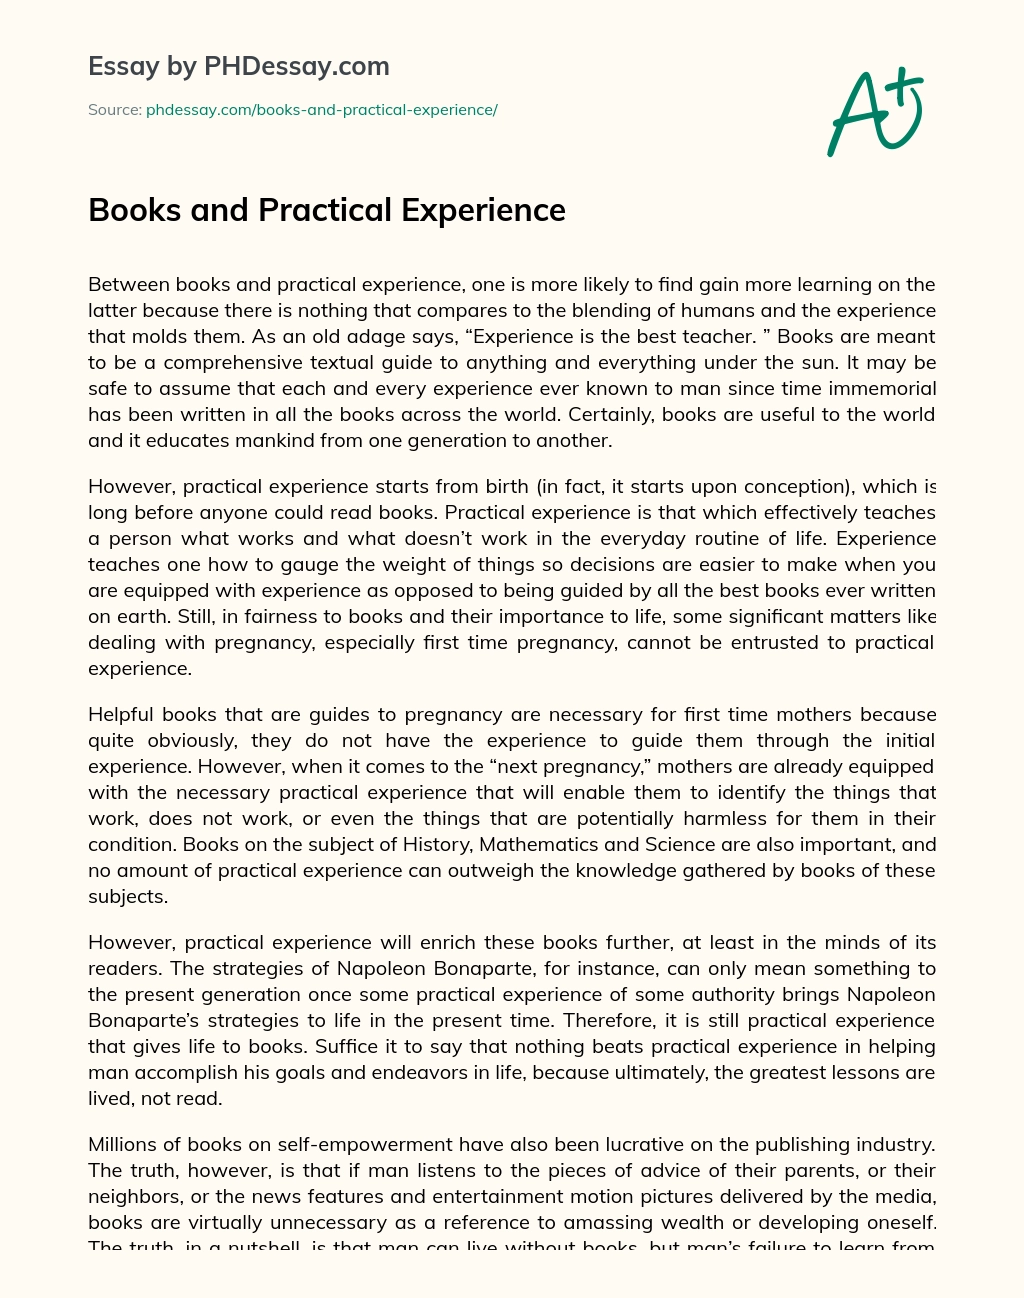 Books and Practical Experience essay